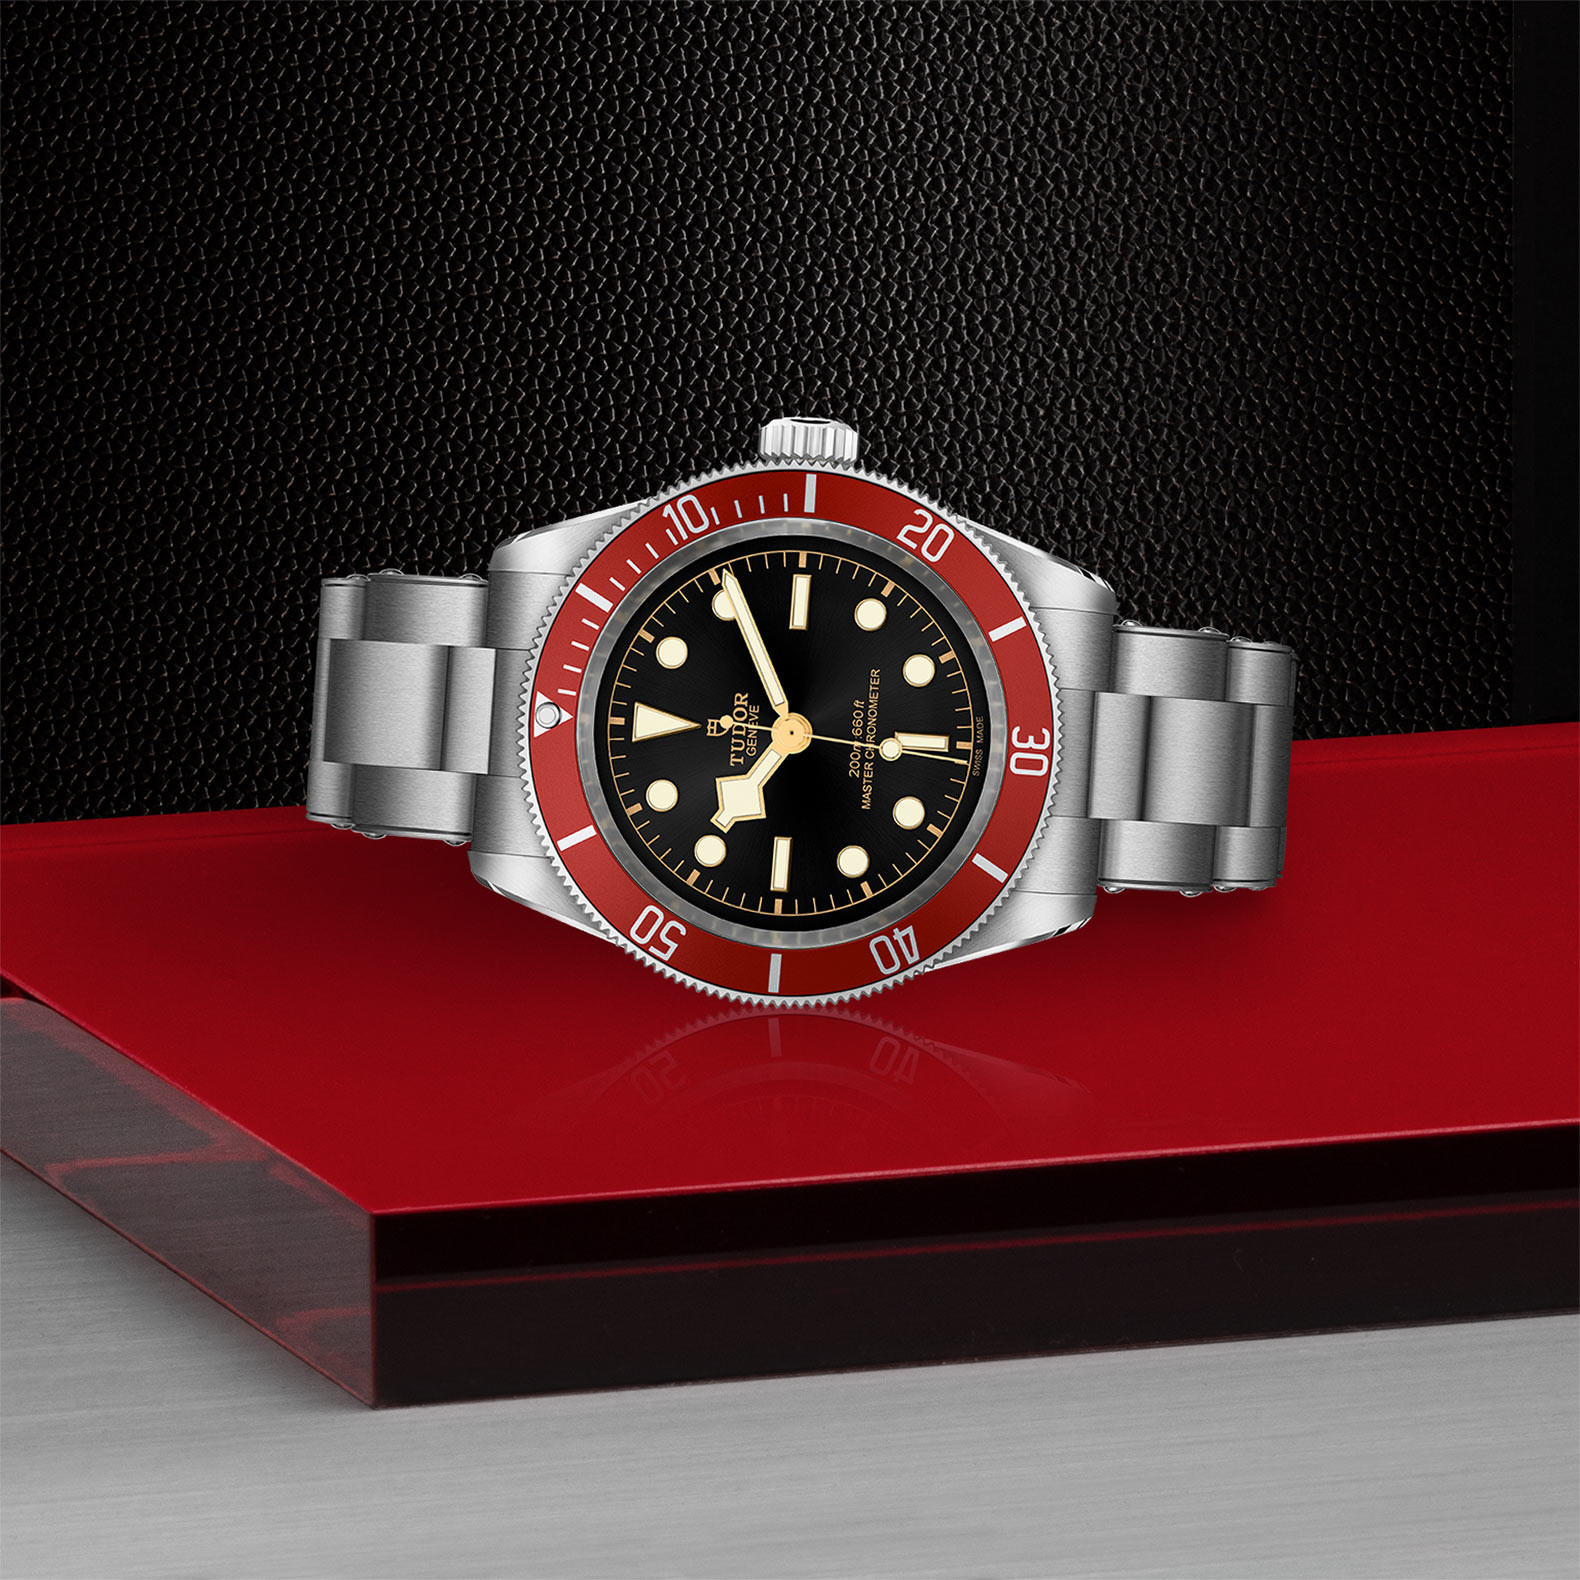 TUDOR Black Bay with 41mm Steel Case and Steel Bracelet M7941A1A0RU-0001 Watch in Store Laying Down